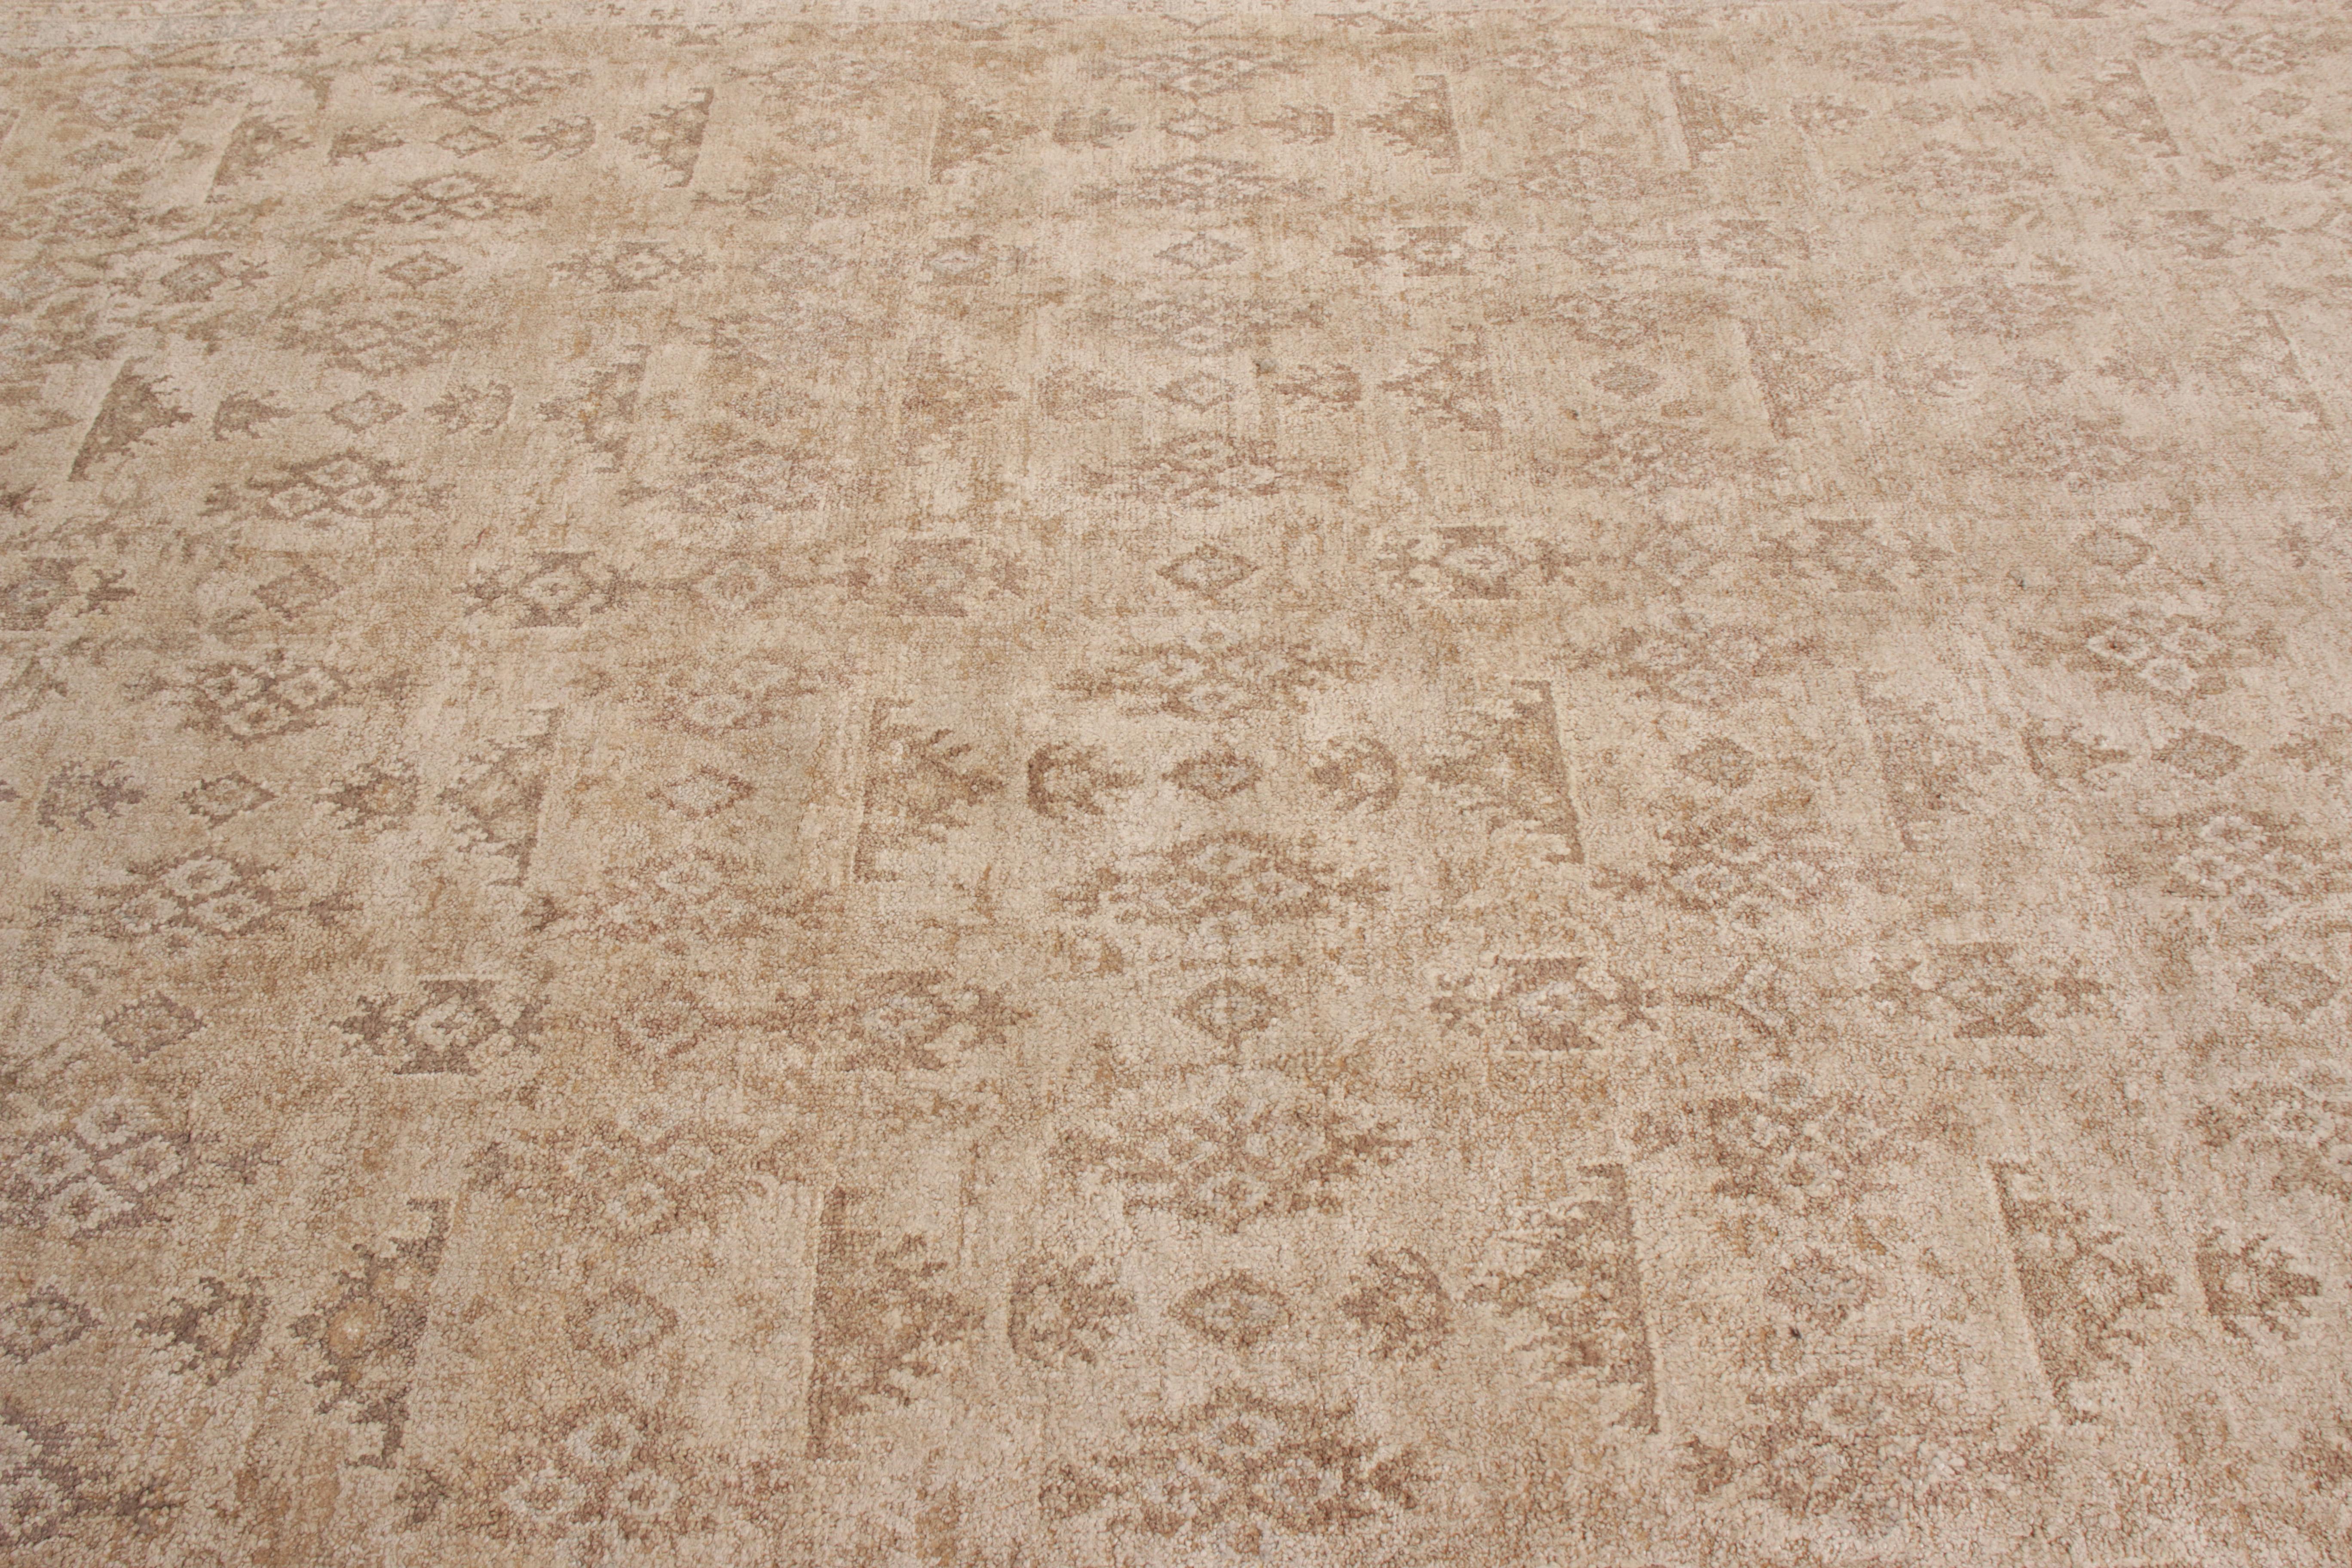 Indian Rug & Kilim’s Transitional Style Rug in Beige-Brown All over Floral Pattern For Sale